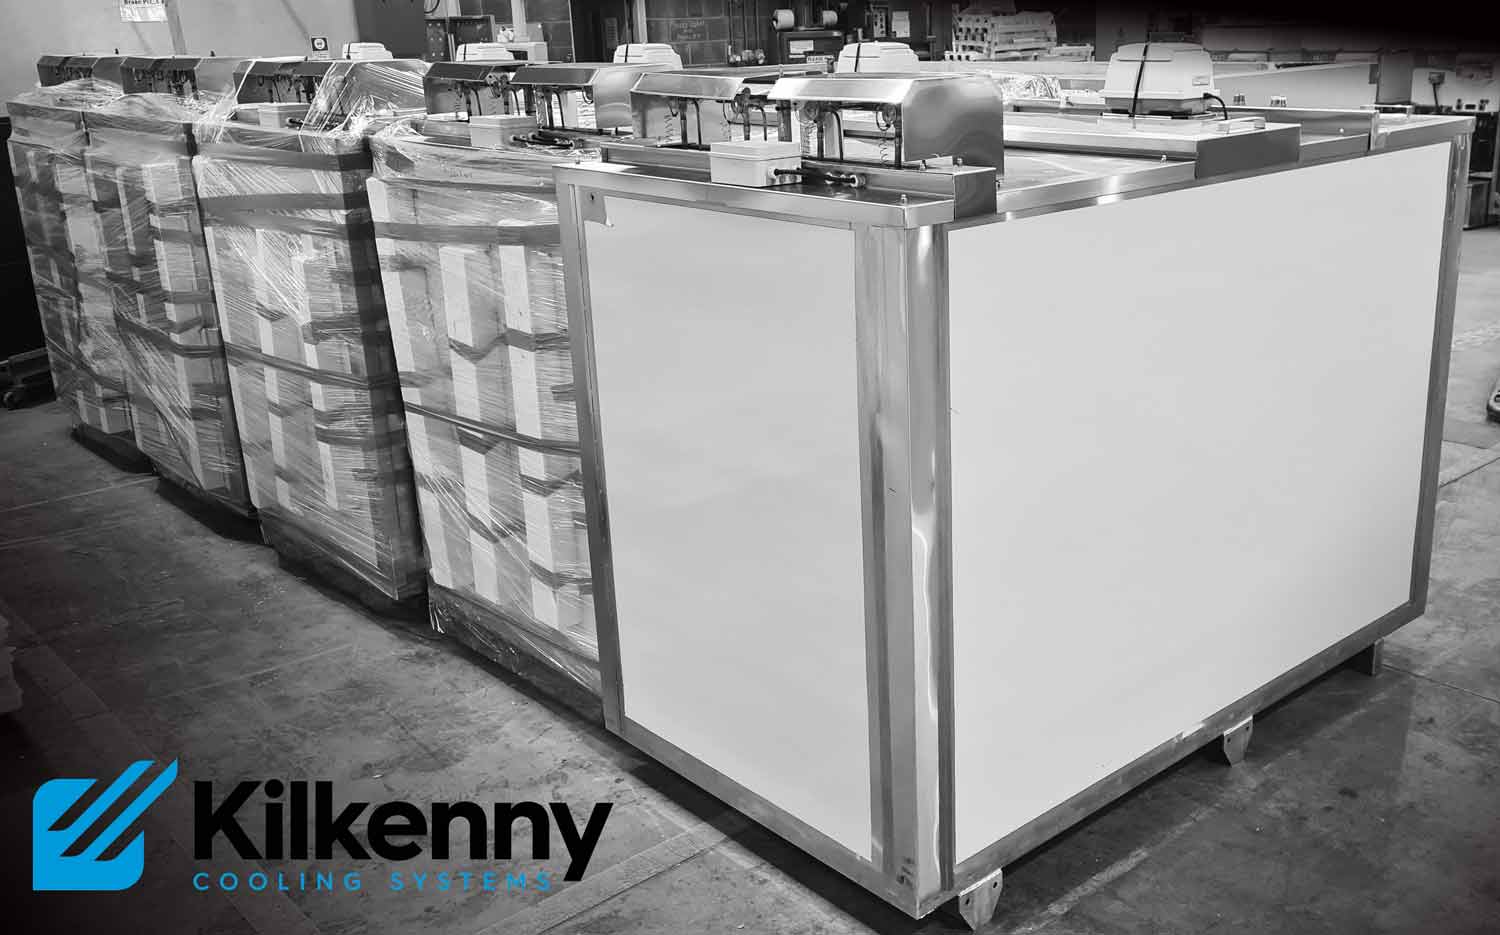 Ice Builder Kilkenny 2050kg Ice with out condensing unit